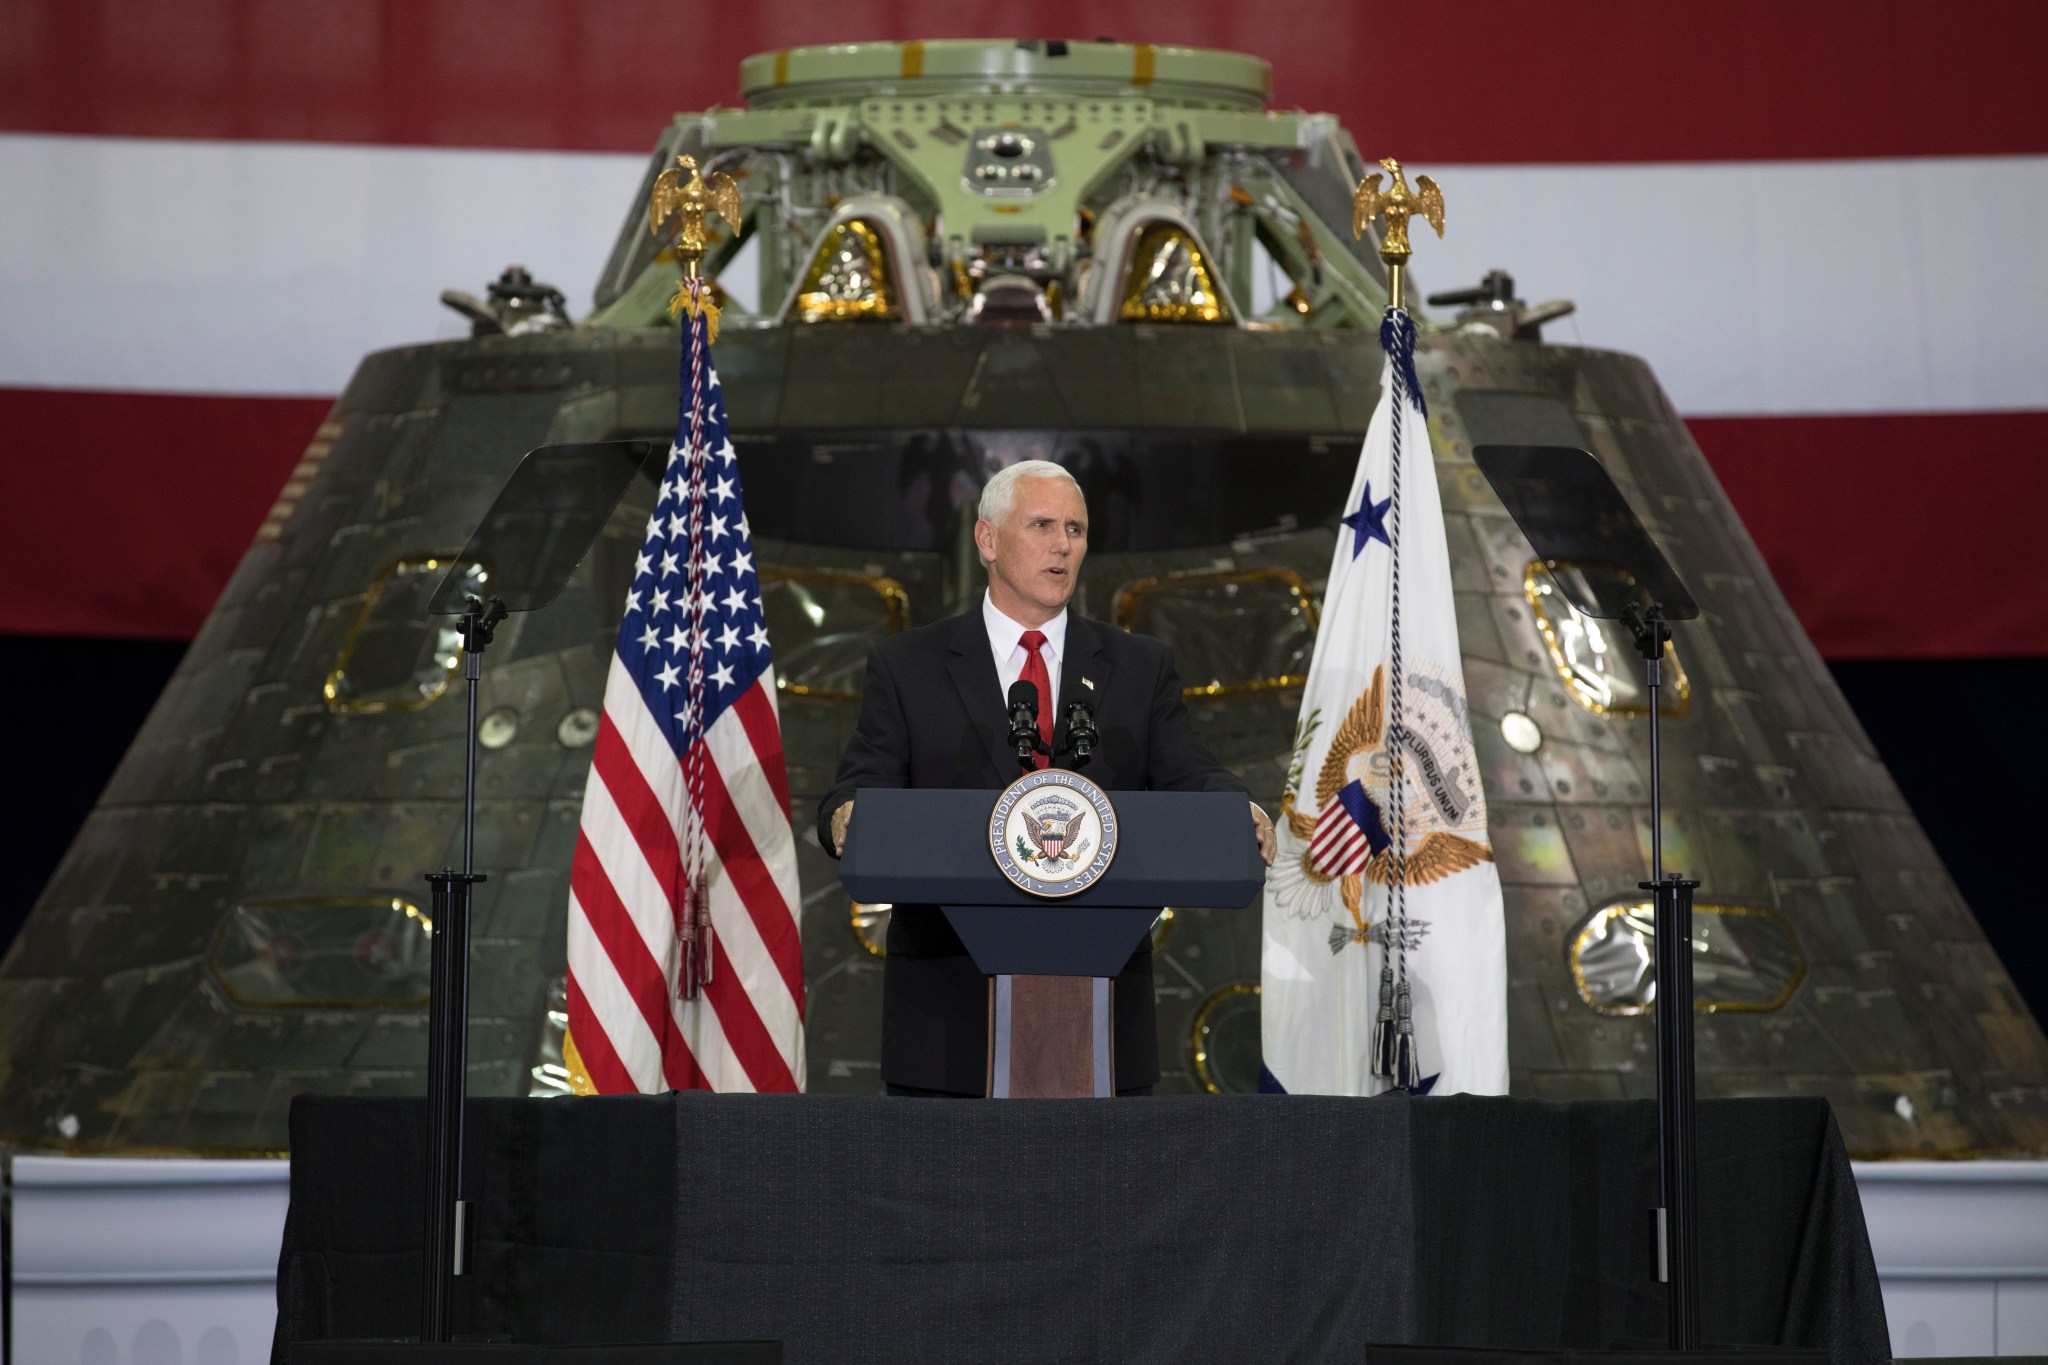 Vice President Mike Pence speaks before an audience of NASA leaders, U.S. and Florida government officials, and employees